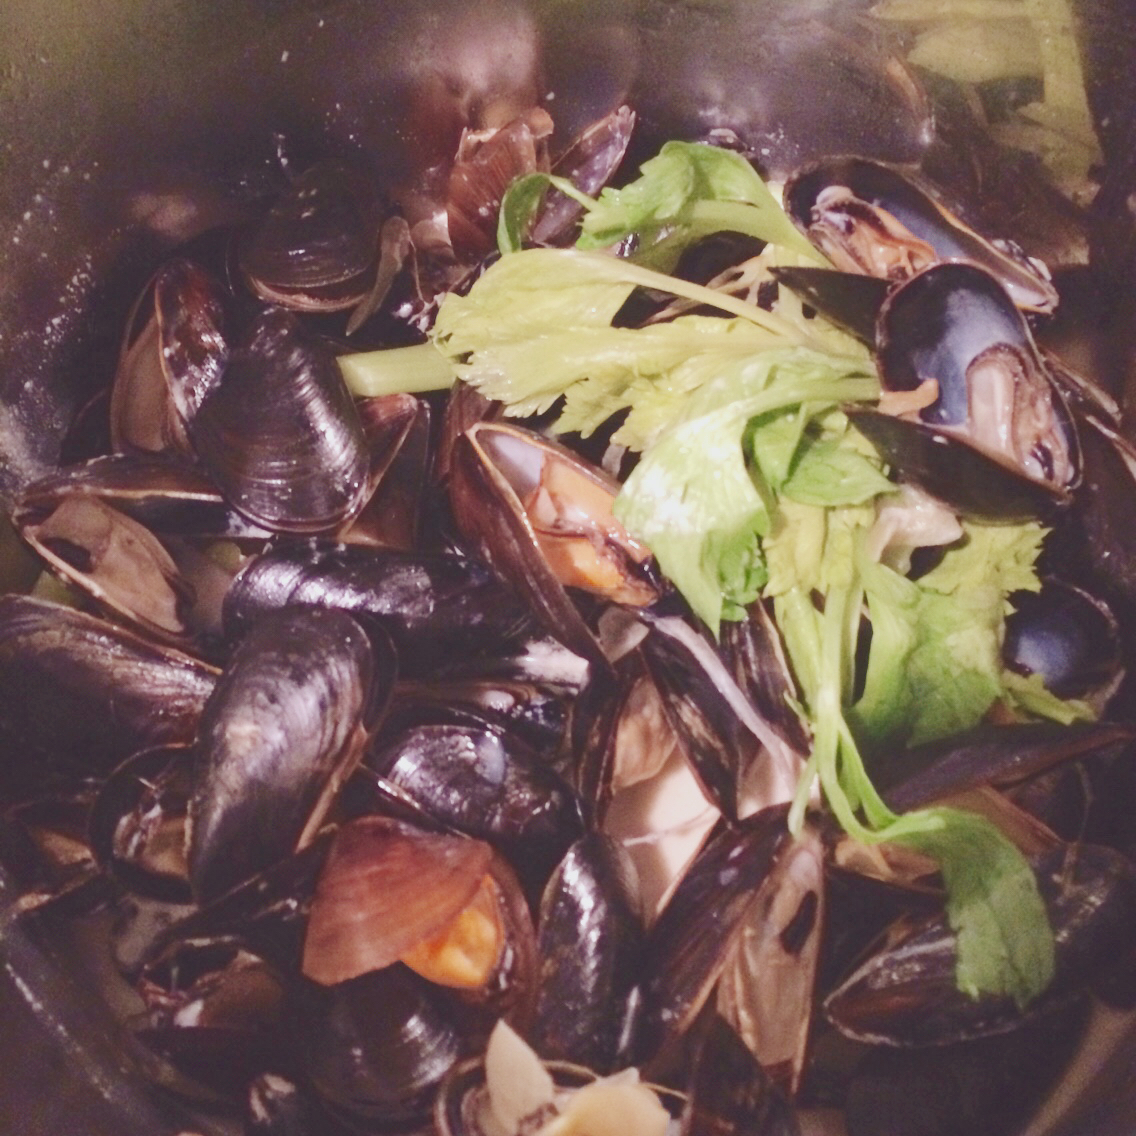 Steamed mussels with wine and cream 法式奶油青口贝